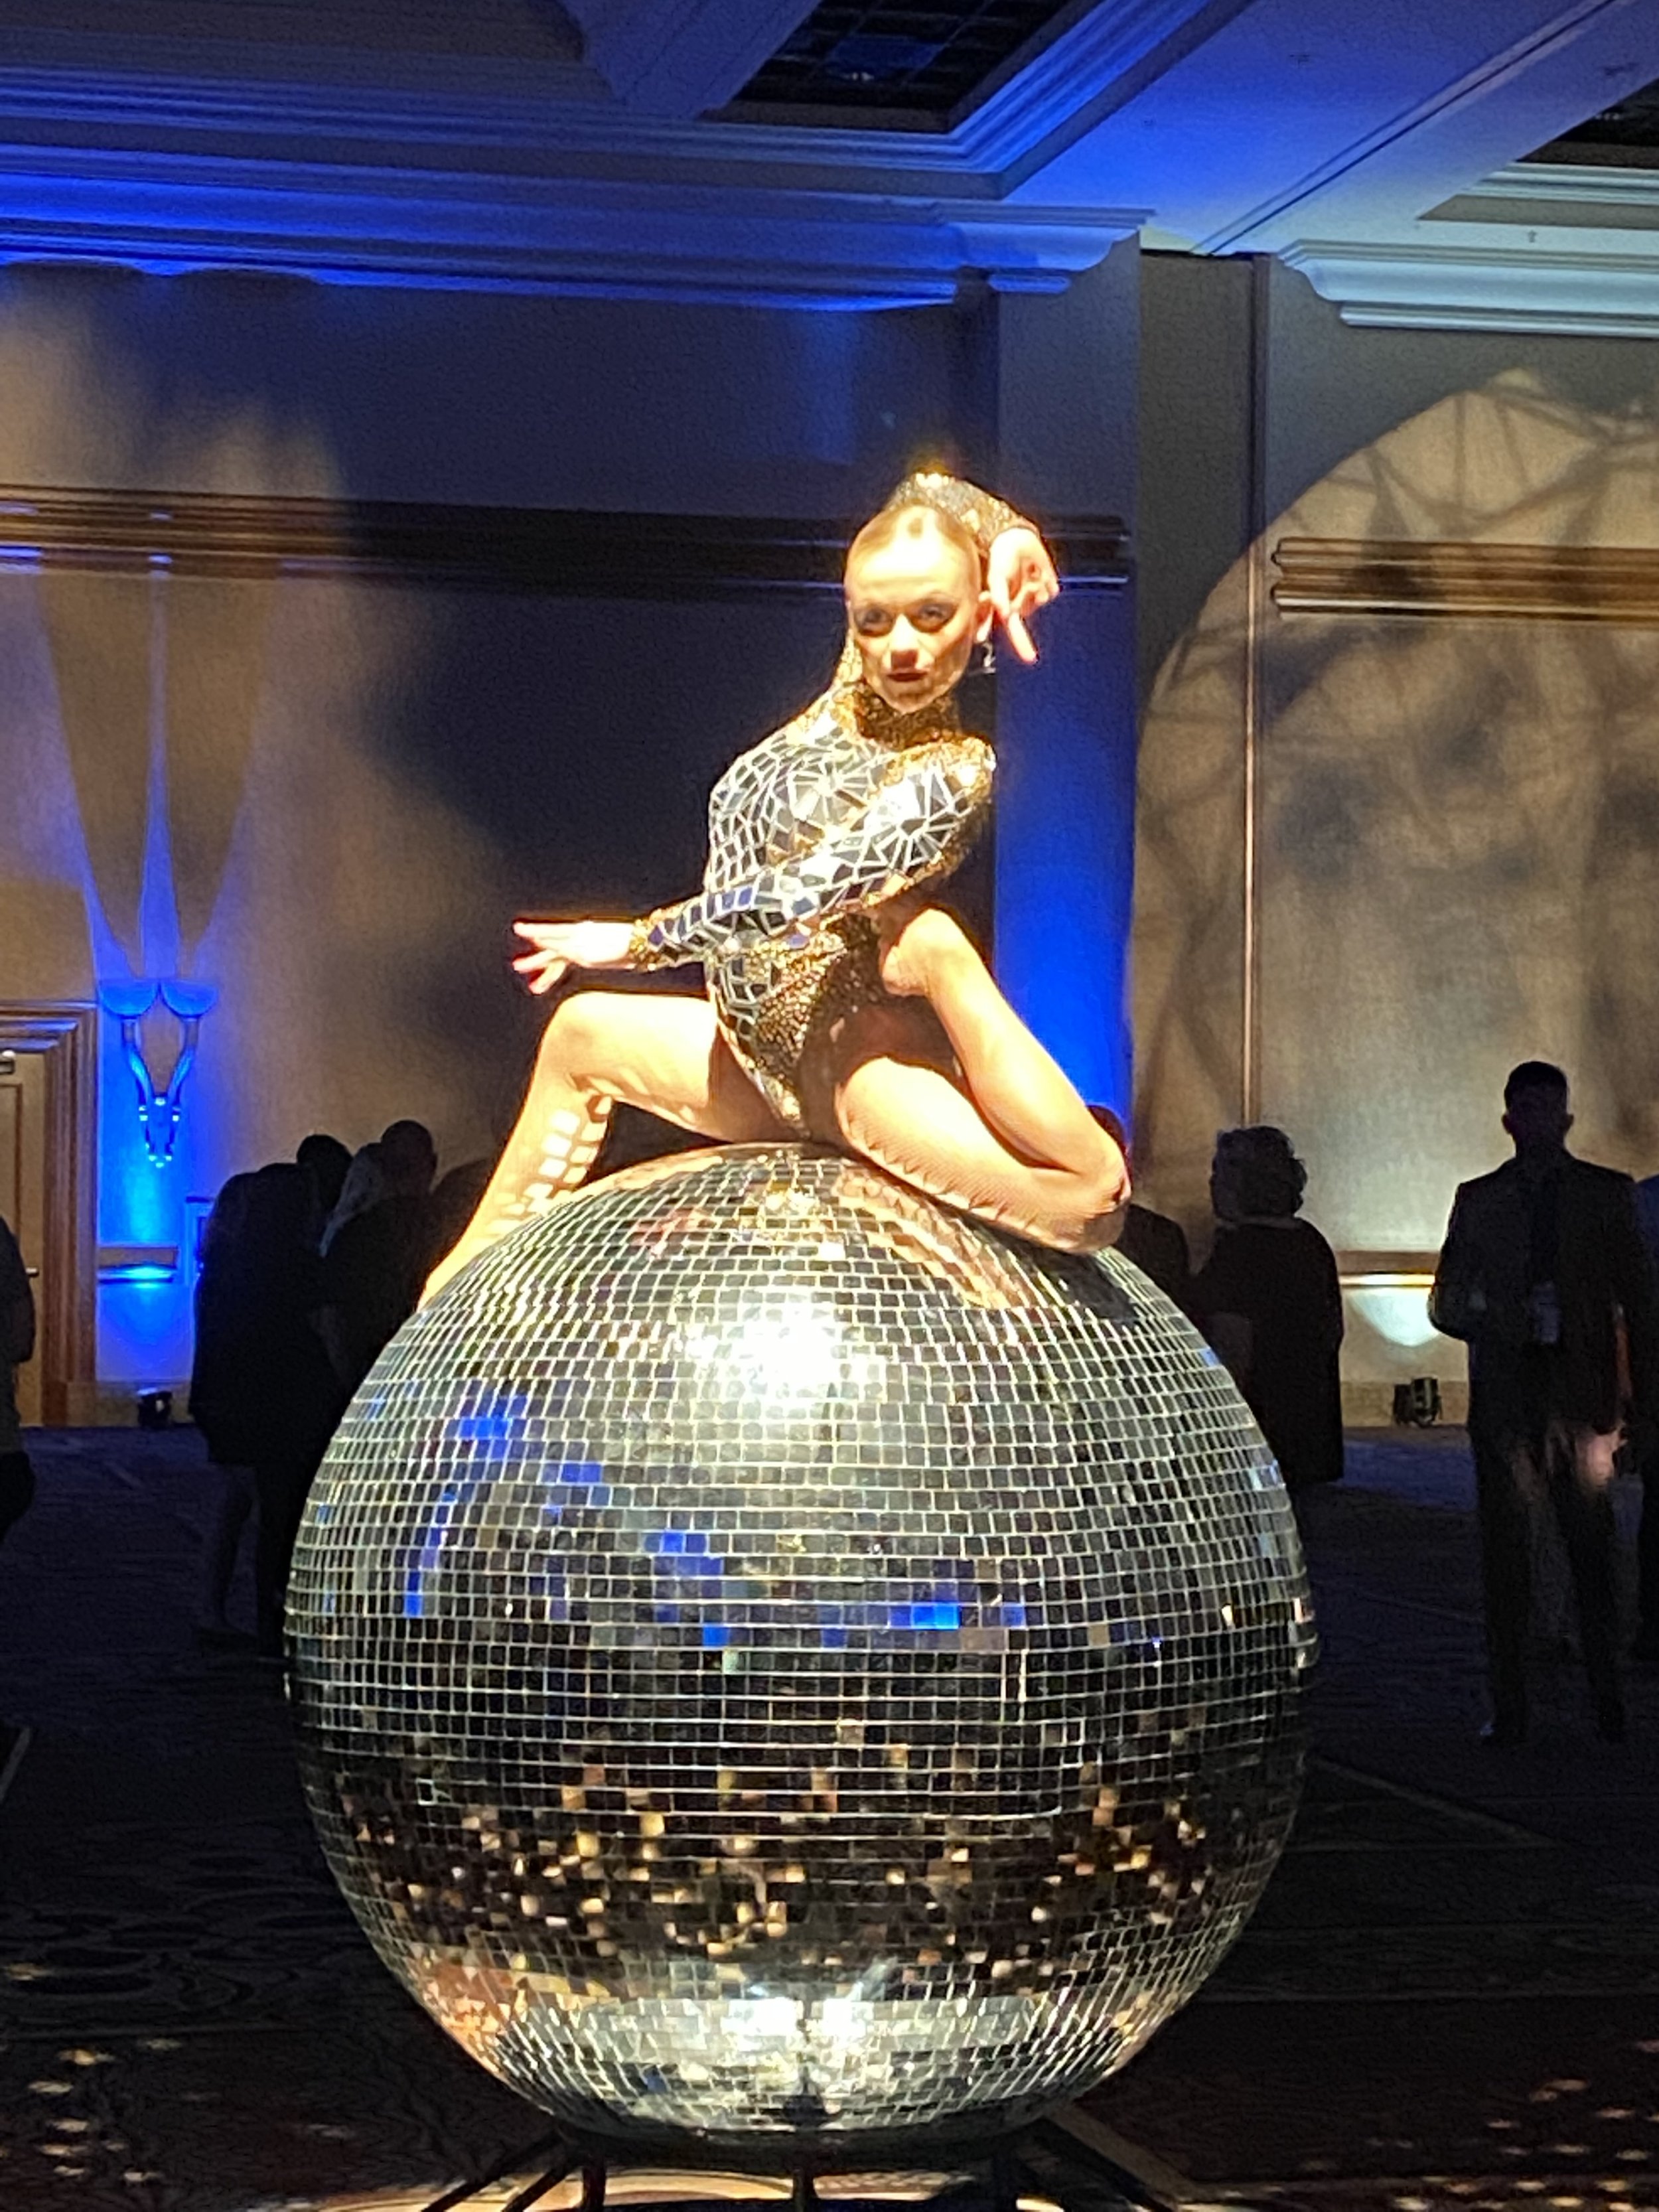 Large 6ft Disco Ball with Cirque Artist 